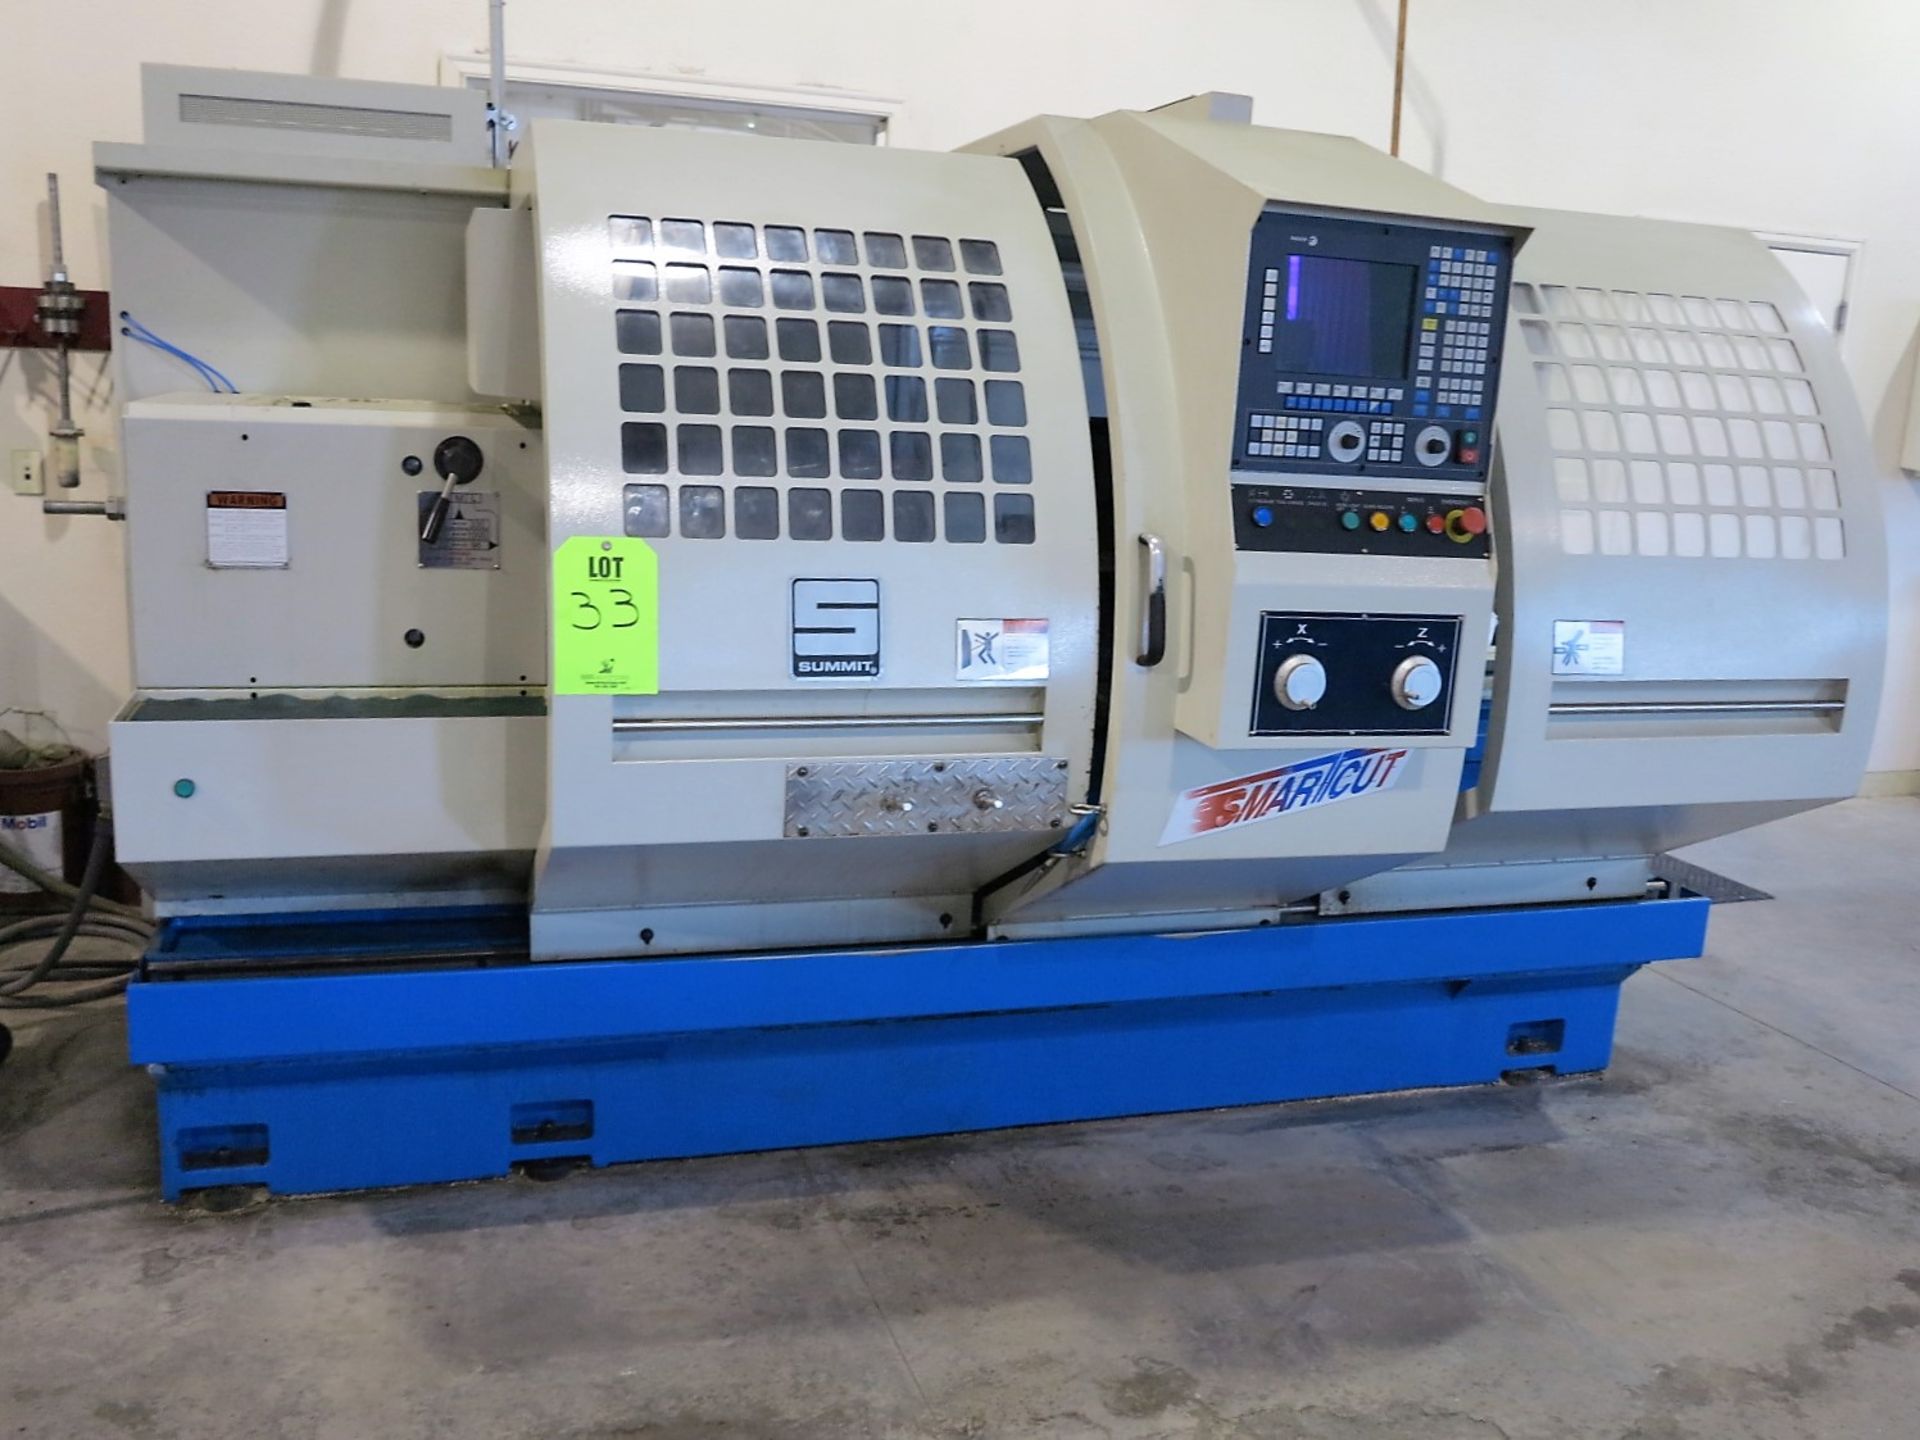 SUMMIT SMARTCUT SC-24X60 CNC LATHE, FAGOR CNC CONTROL, 24” SWING OVER BED, 16” SWING OVER SLIDE, 31”